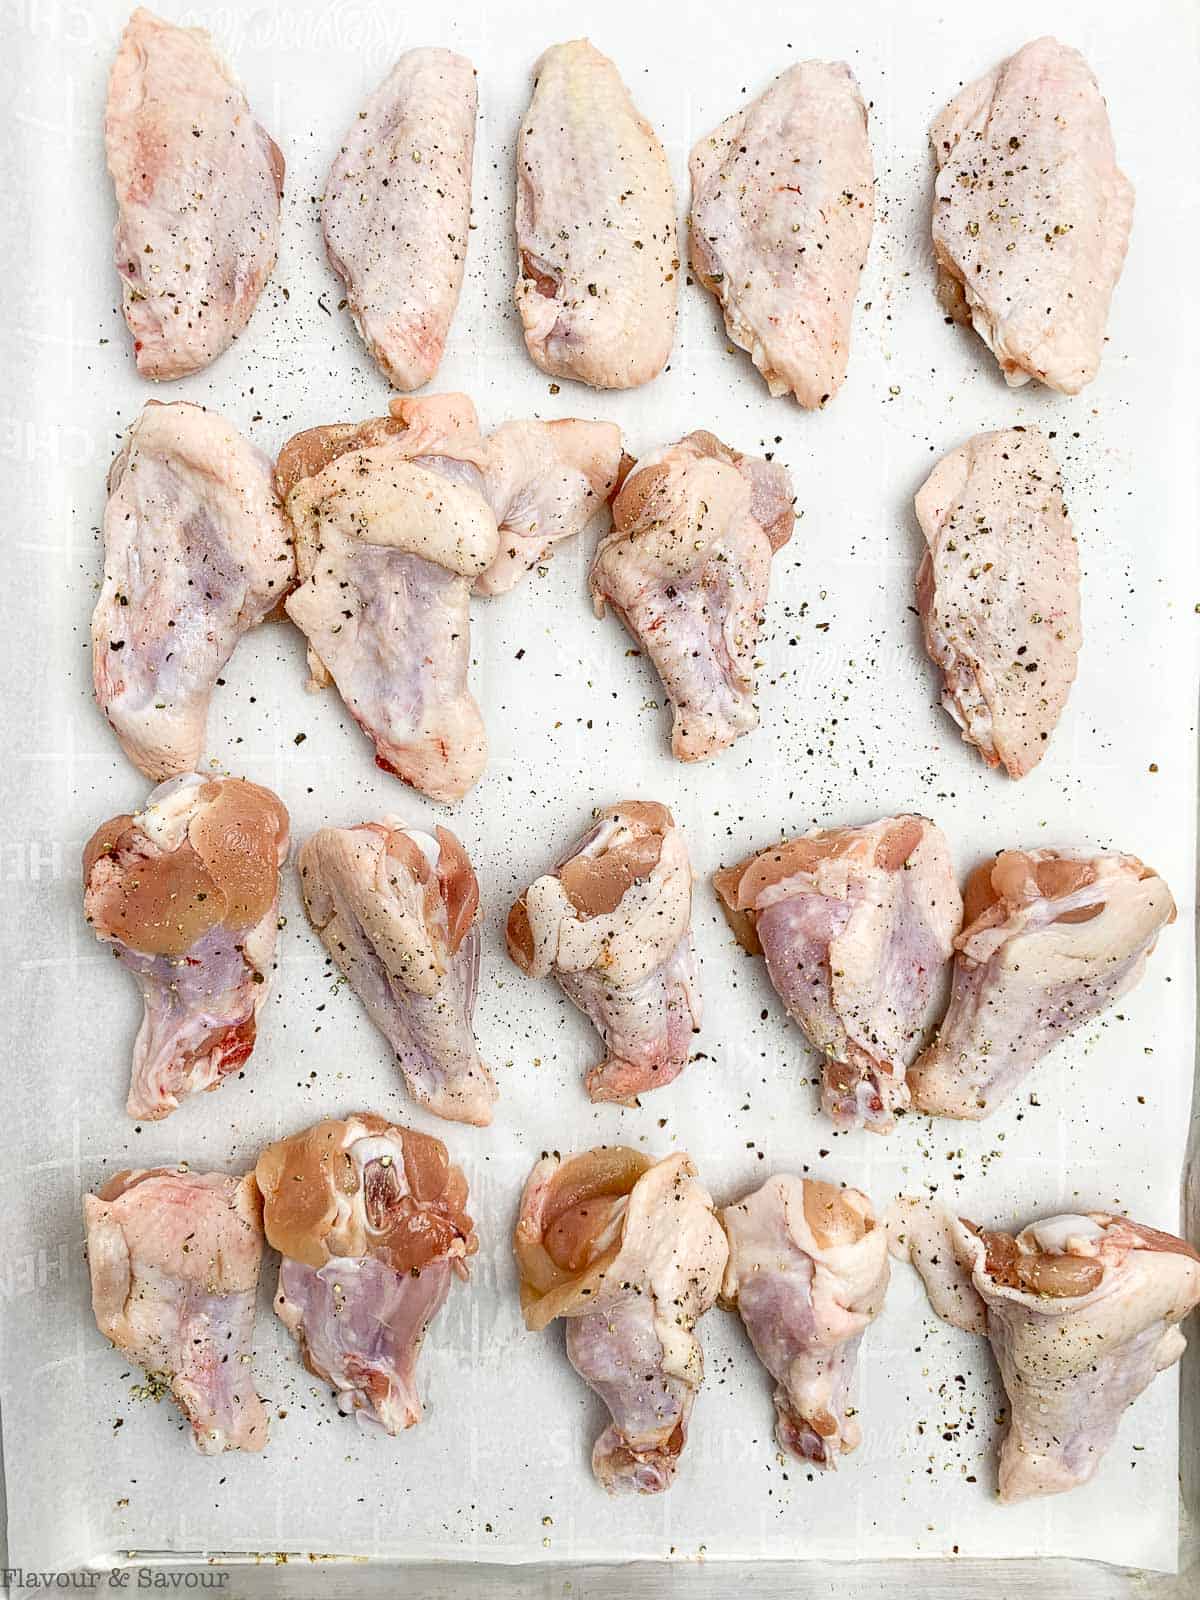 chicken wings sprinkled with salt and pepper.